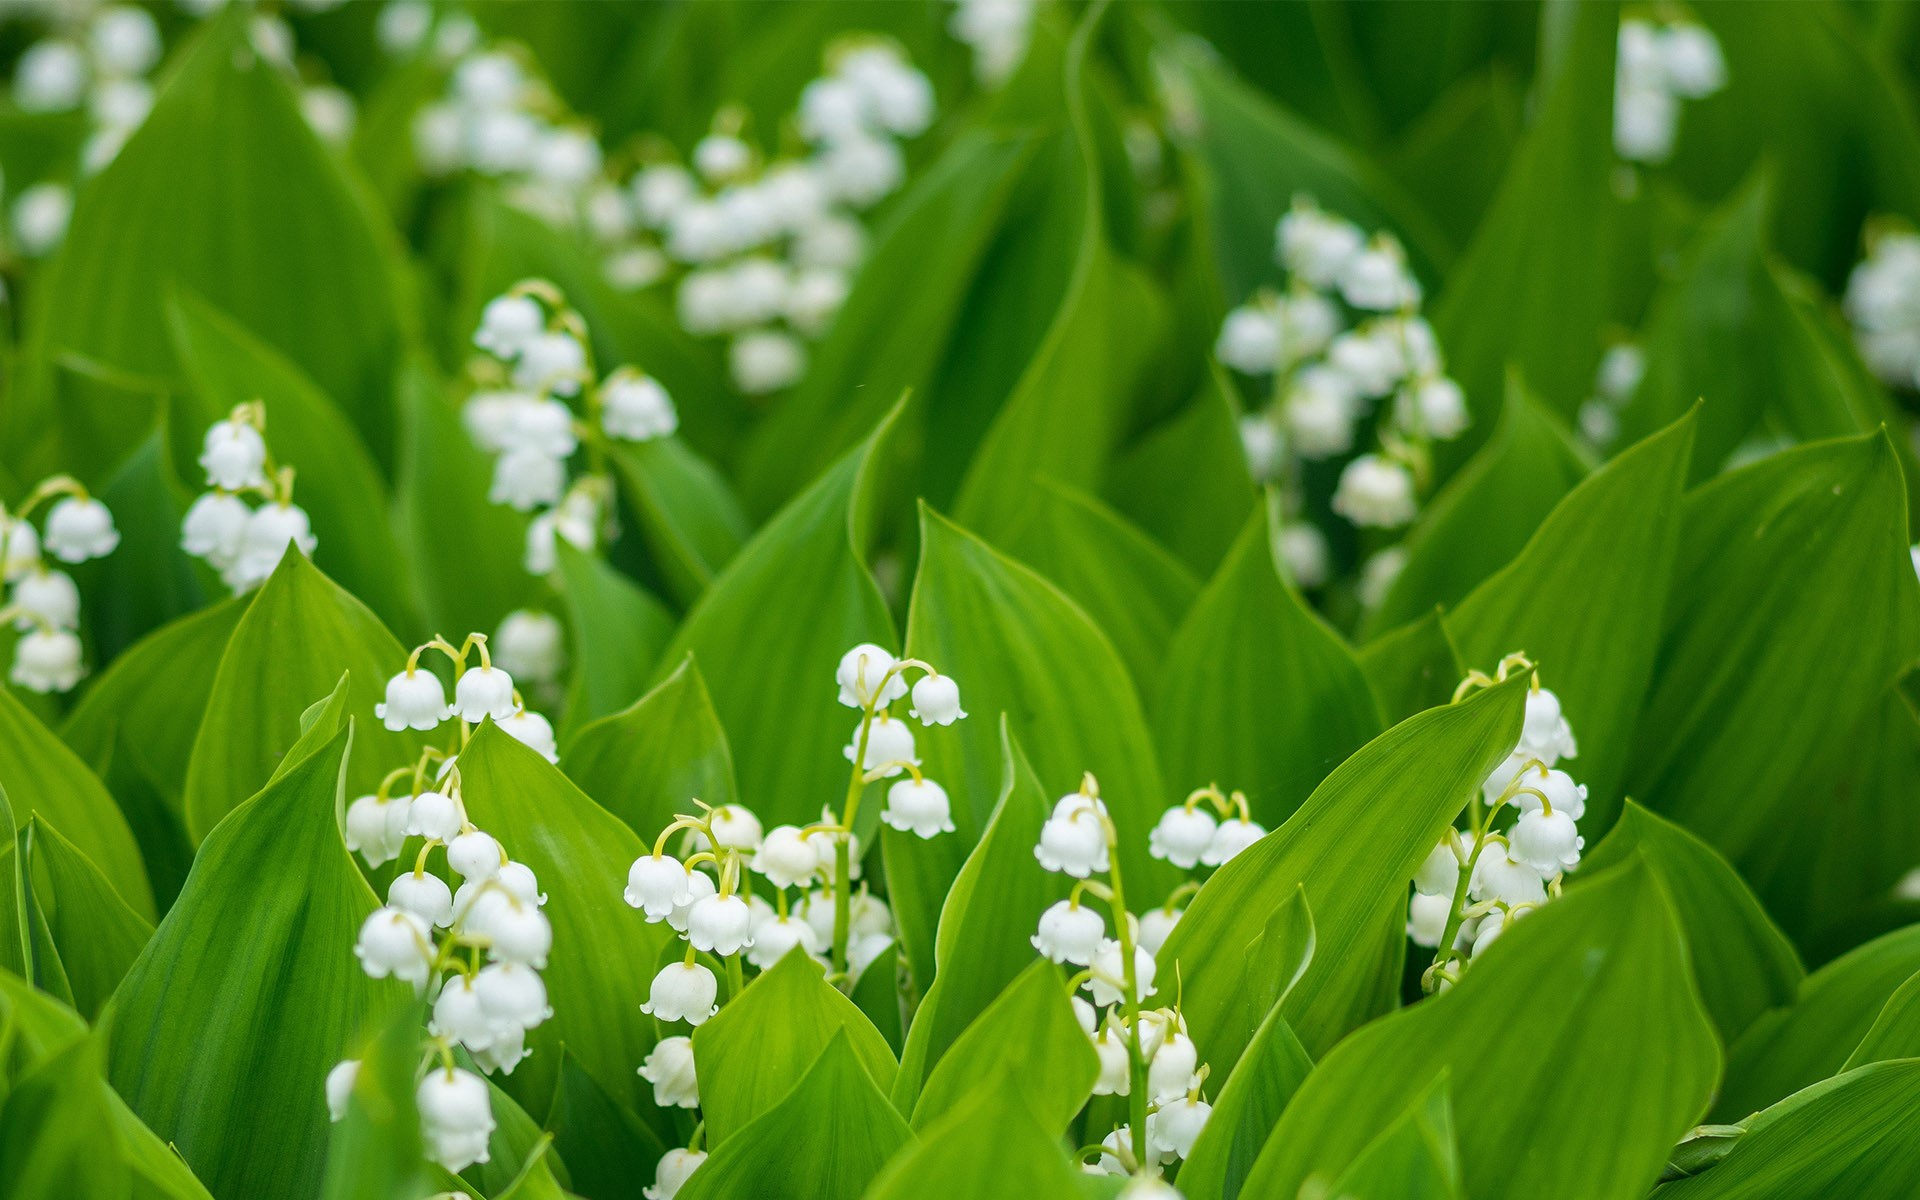 May lily of the valley in bloom